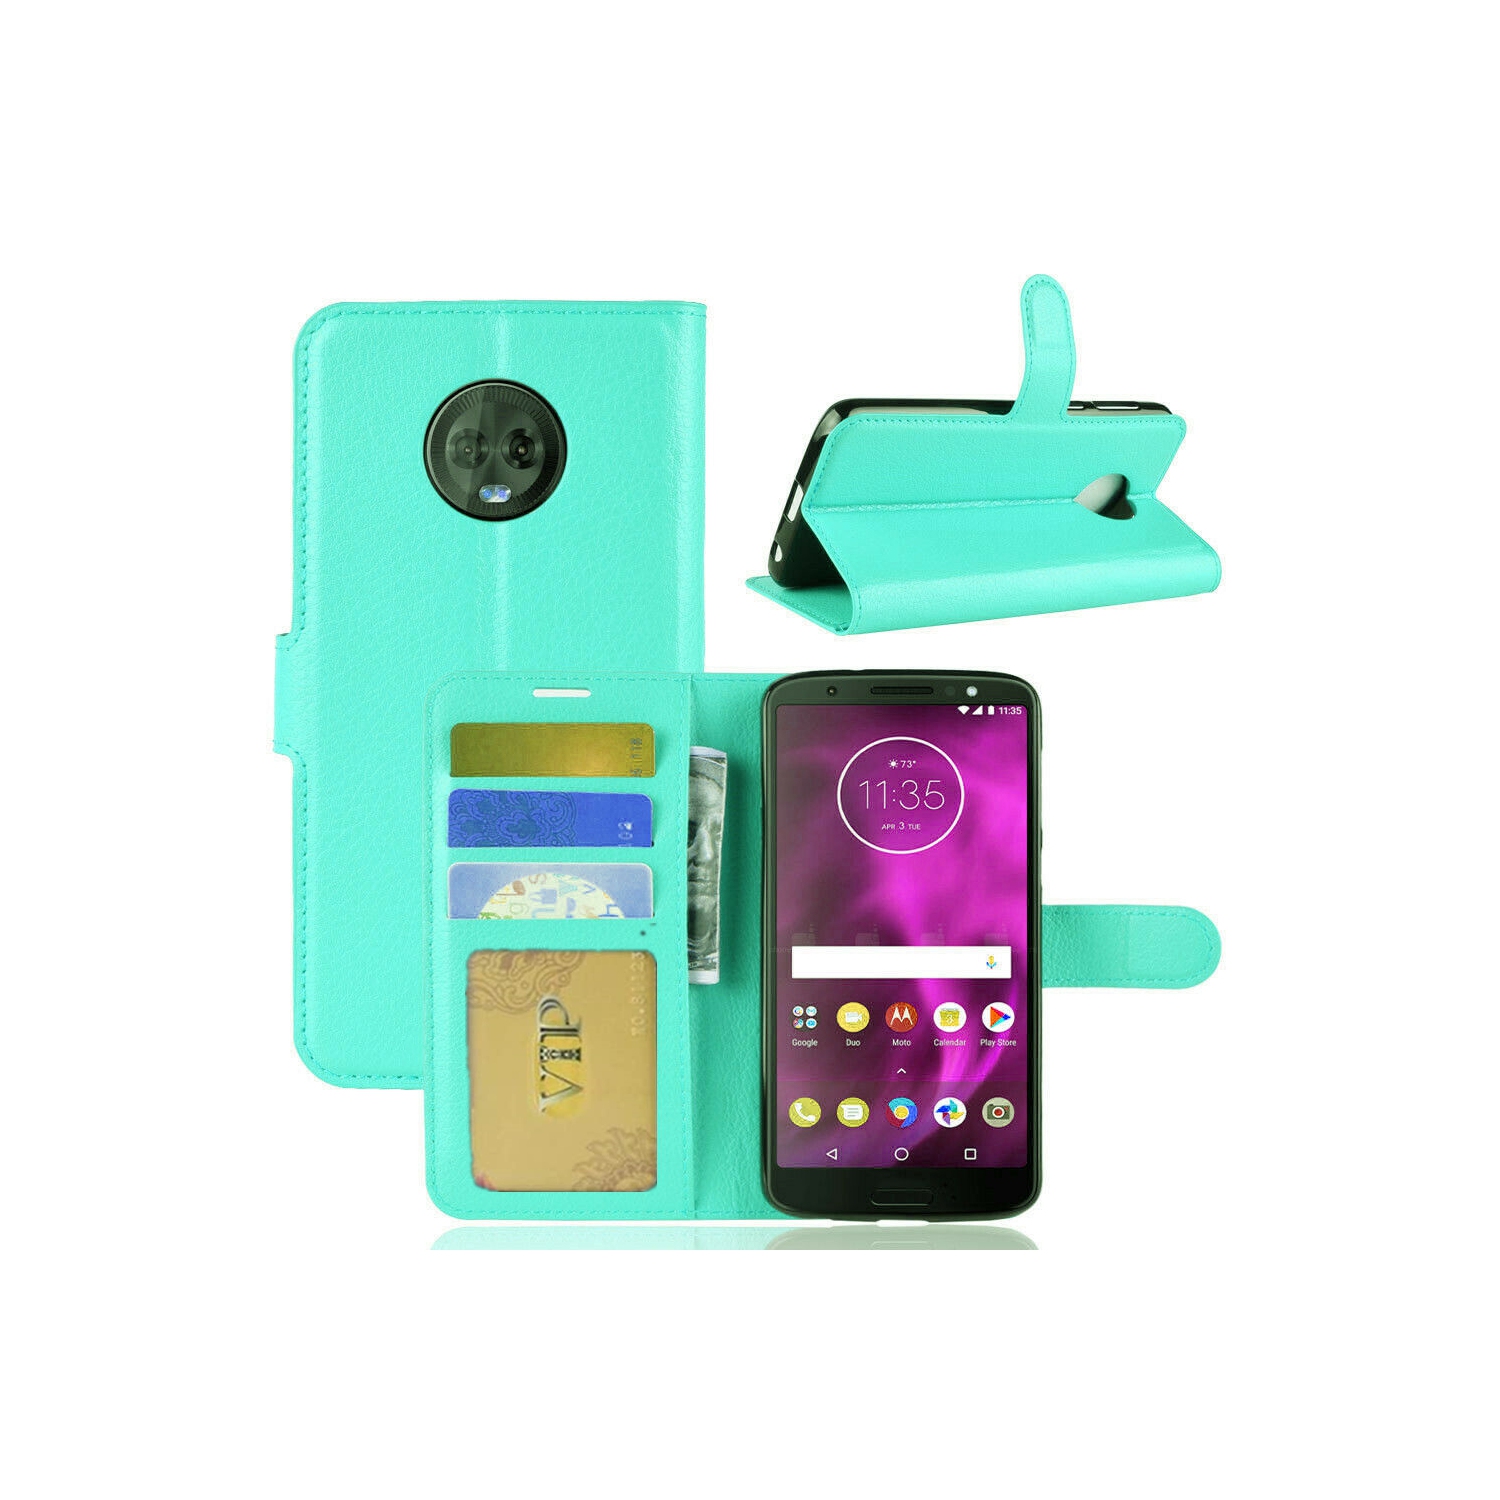 [CS] Motorola Moto G6 Case, Magnetic Leather Folio Wallet Flip Case Cover with Card Slot, Teal